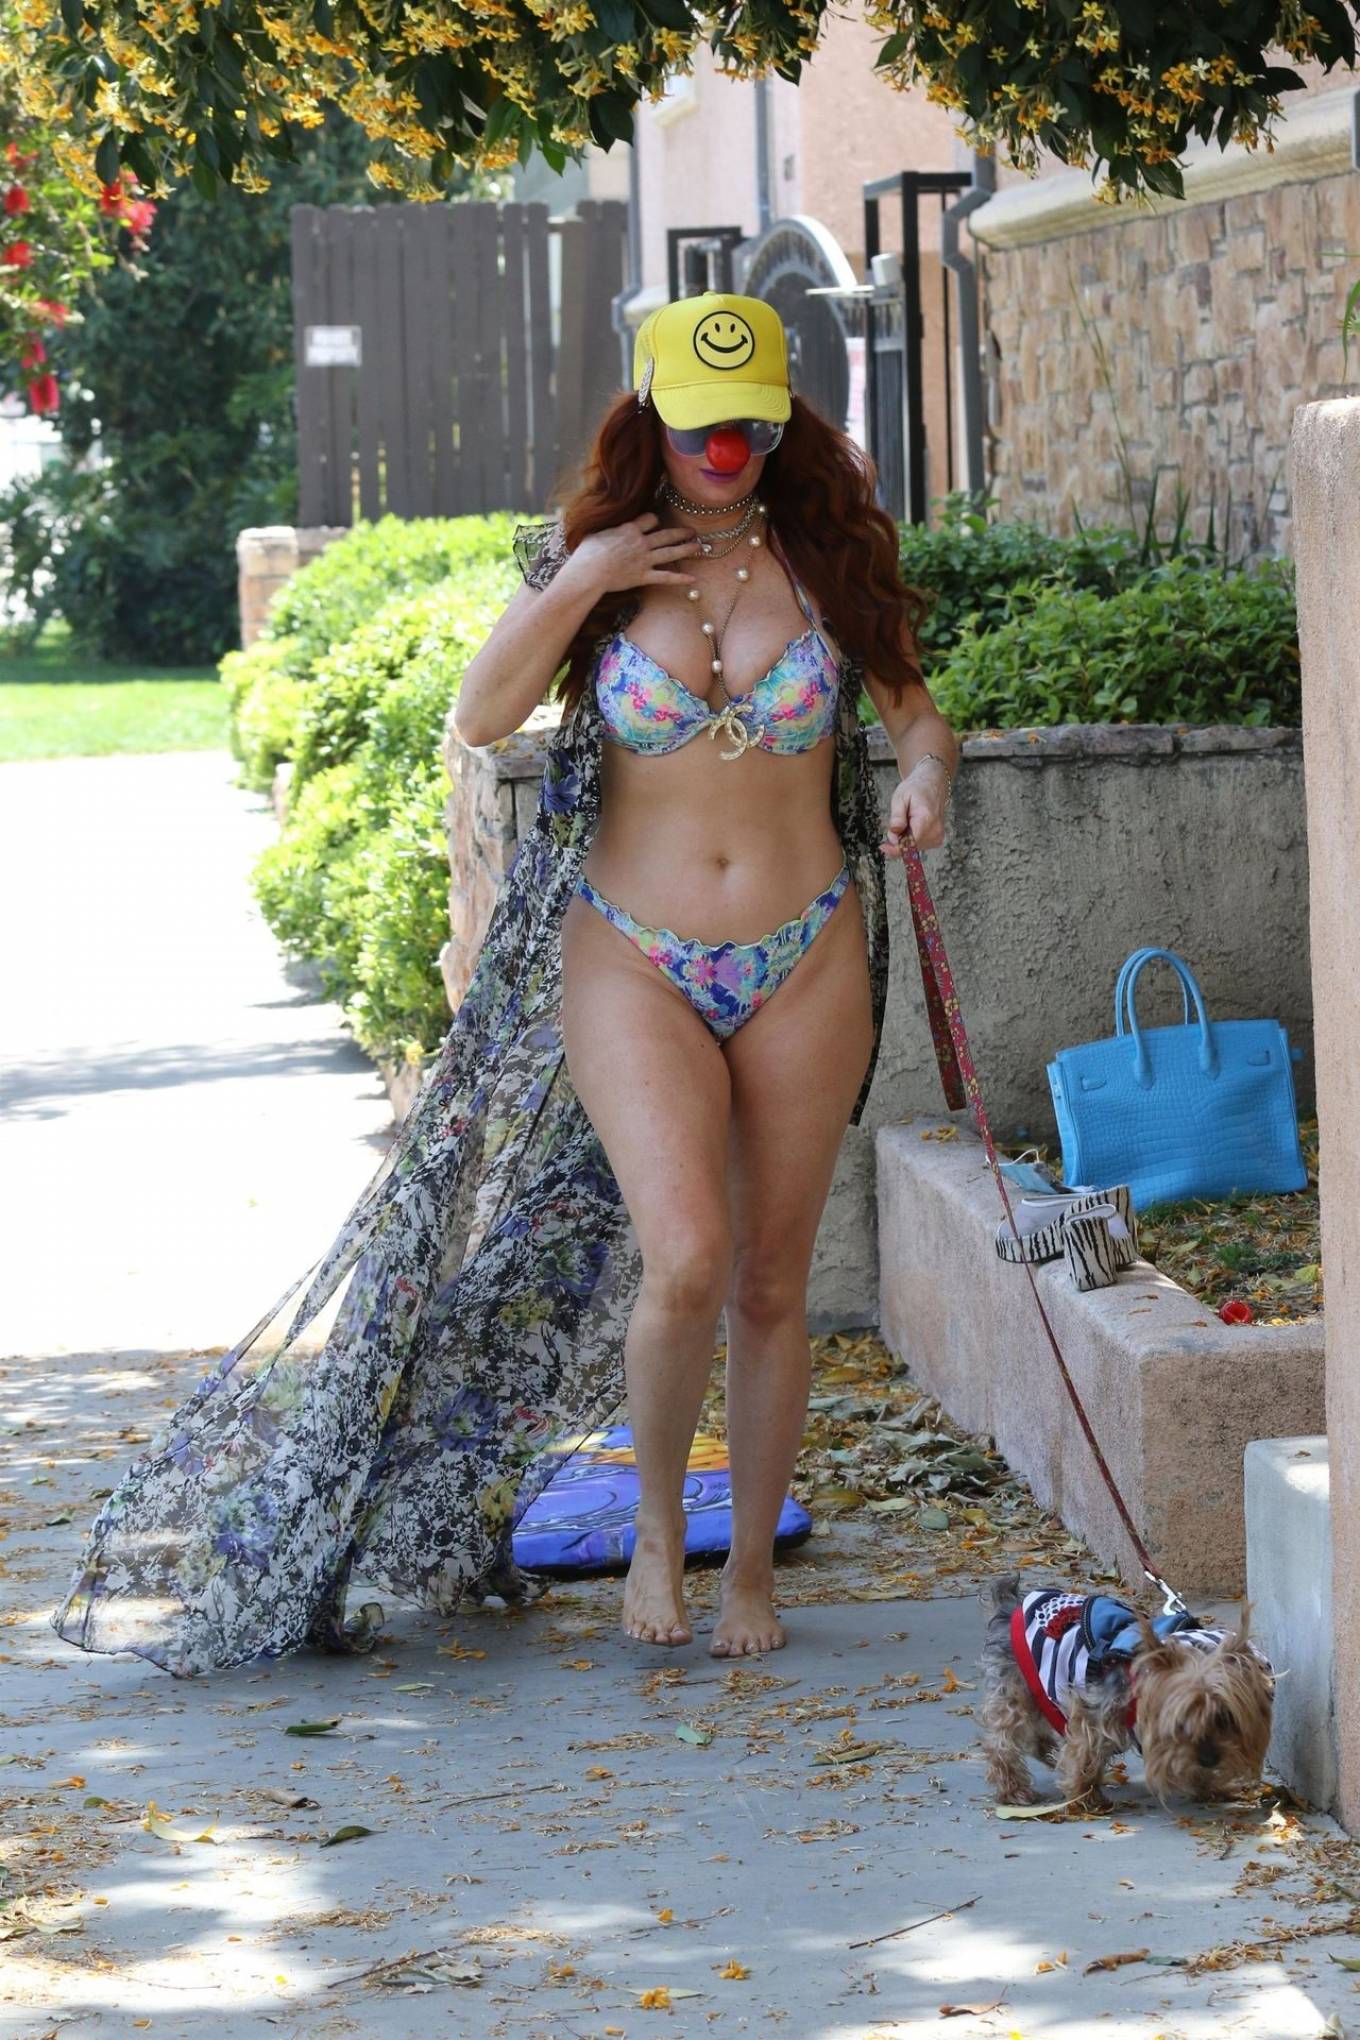 Phoebe Price â€“ When photoshoot gone wrong